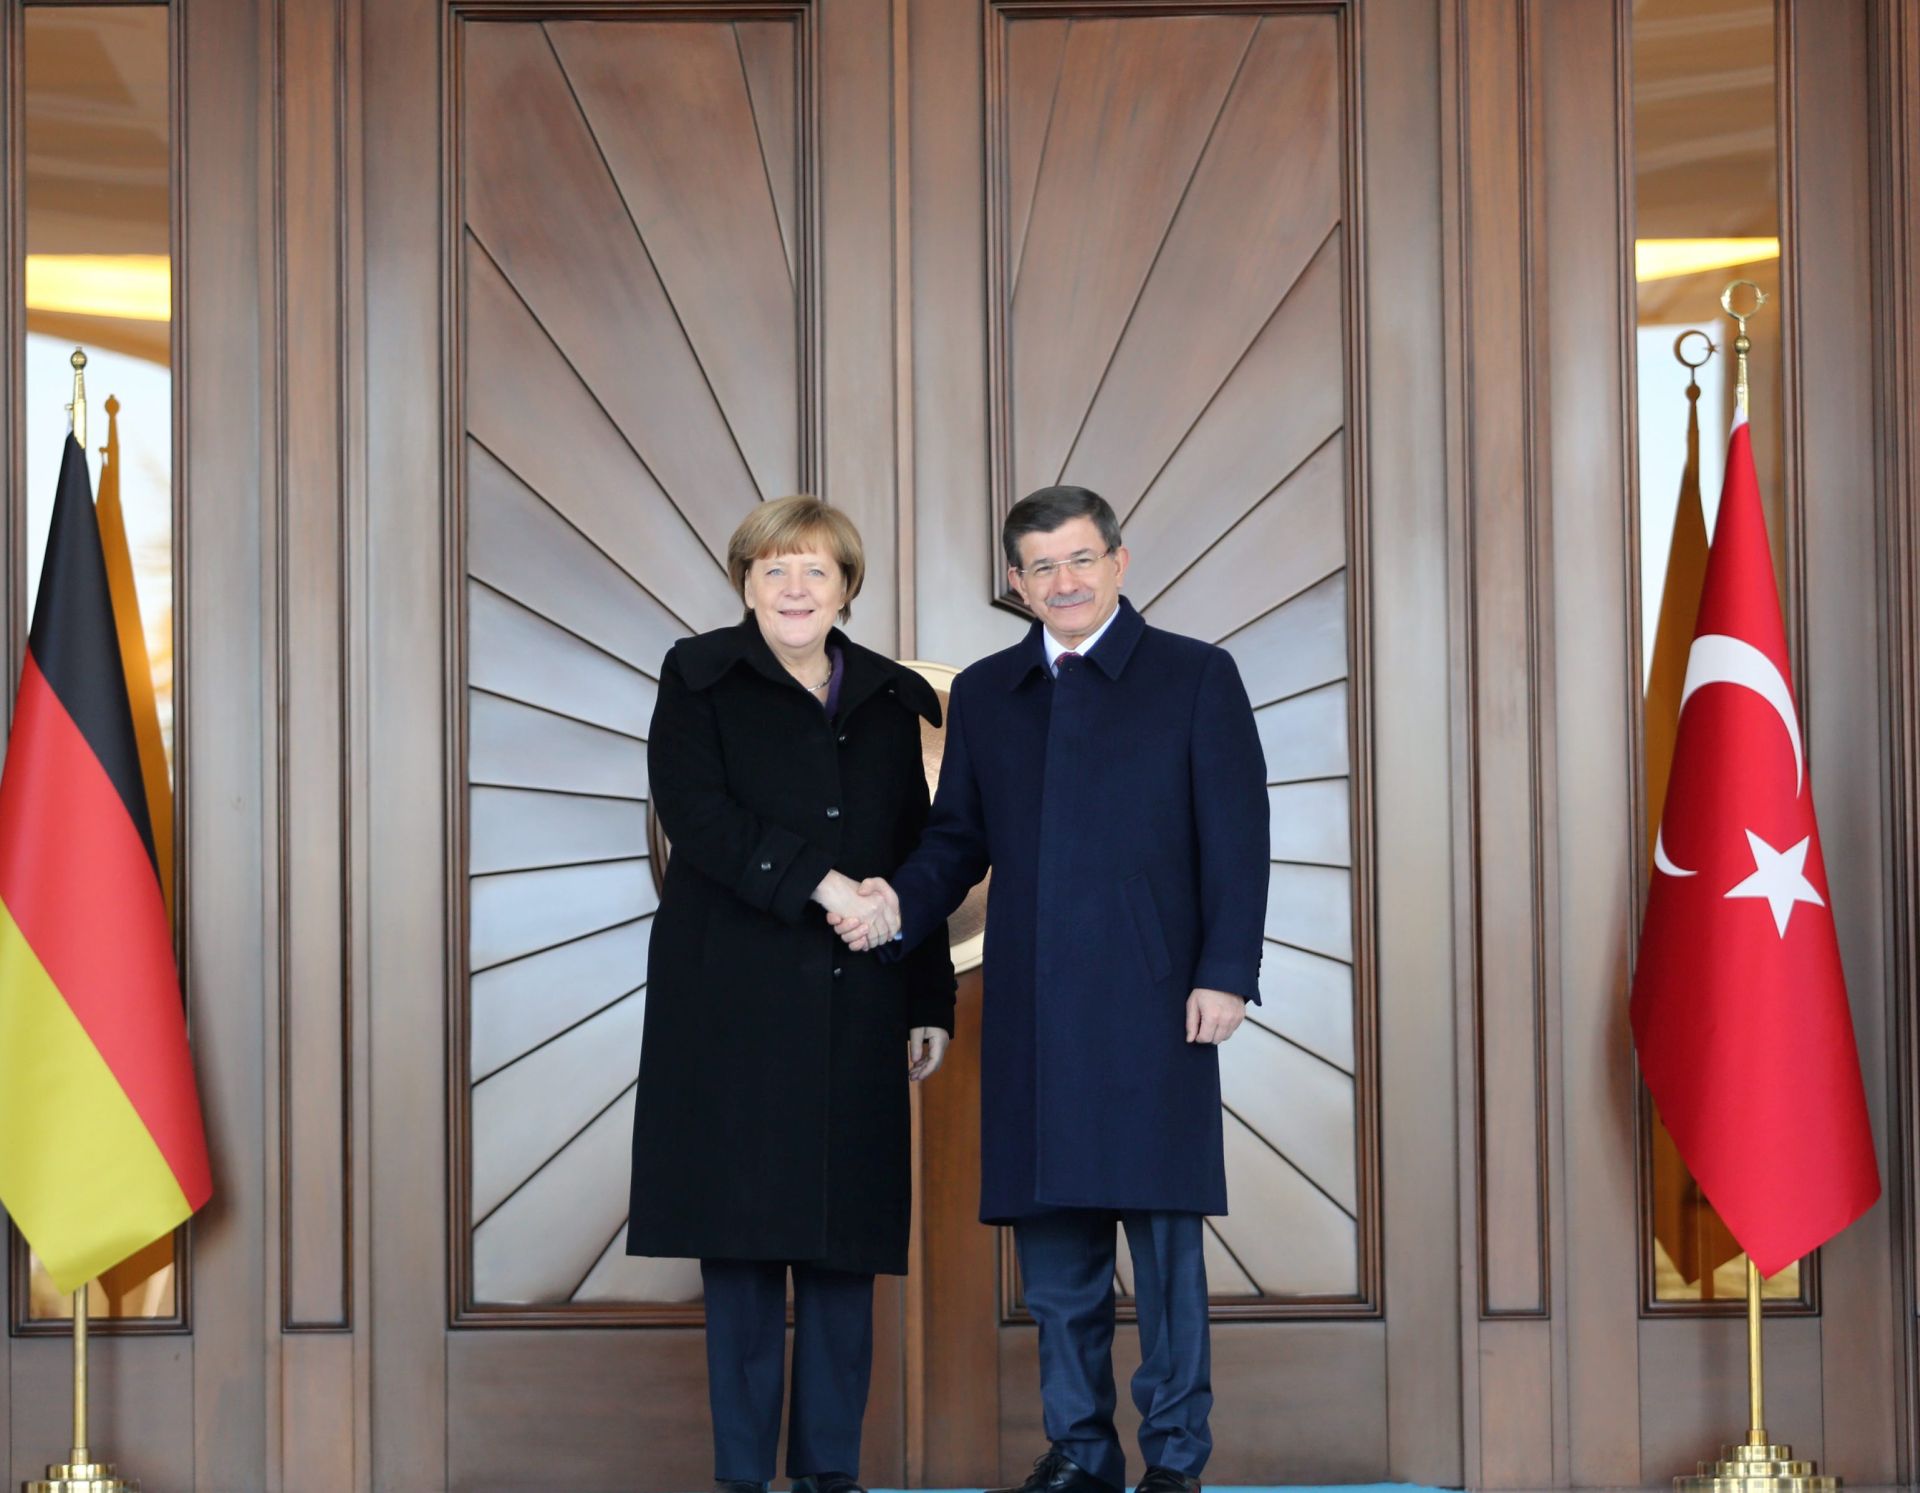 epa05149418 German Chancellor Angela Merkel (L) shake hands with Turkish Prime Minister Ahmet Davutoglu during her visit to Ankara, Turkey, 08 February 2016. Merkel is in Turkey for a one-day official visit.  EPA/STRINGER